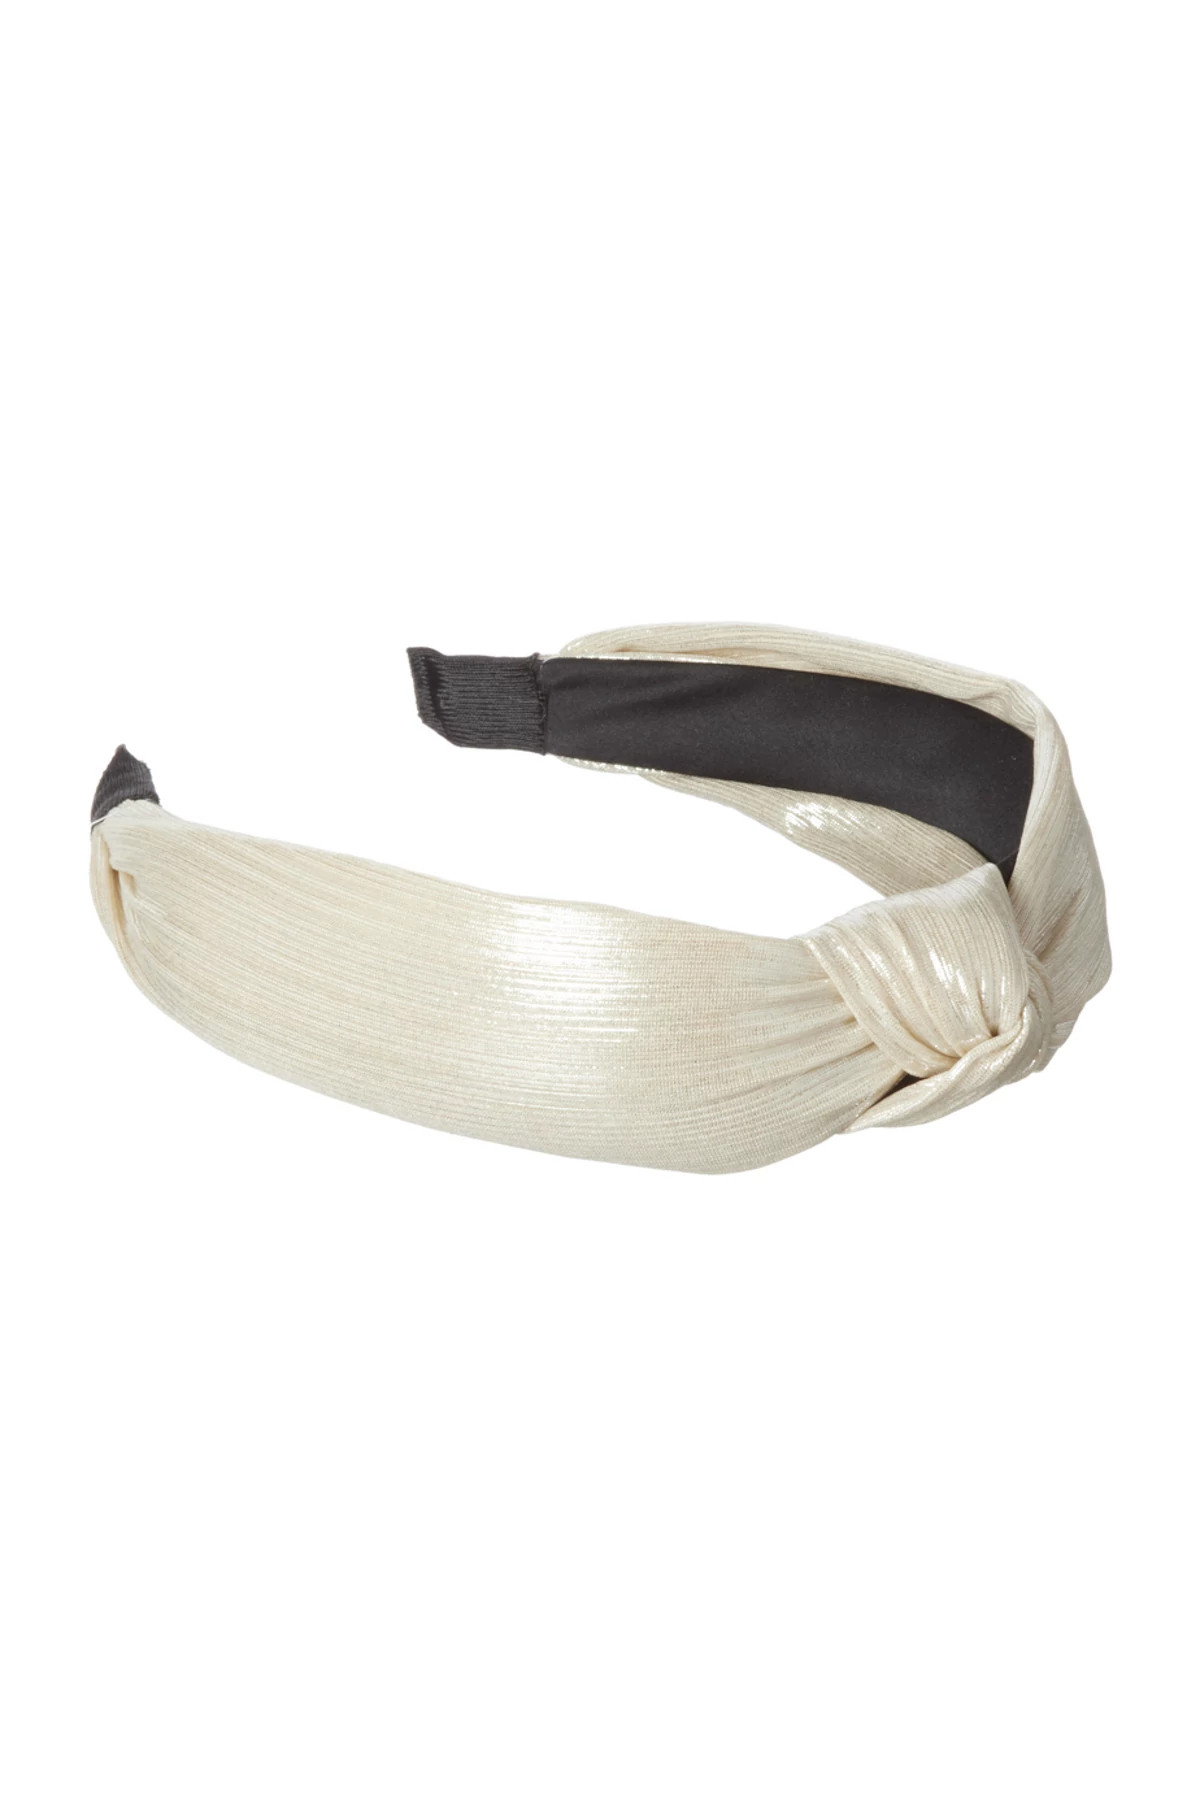 GOLD Knotted Metallic Headband image number 1